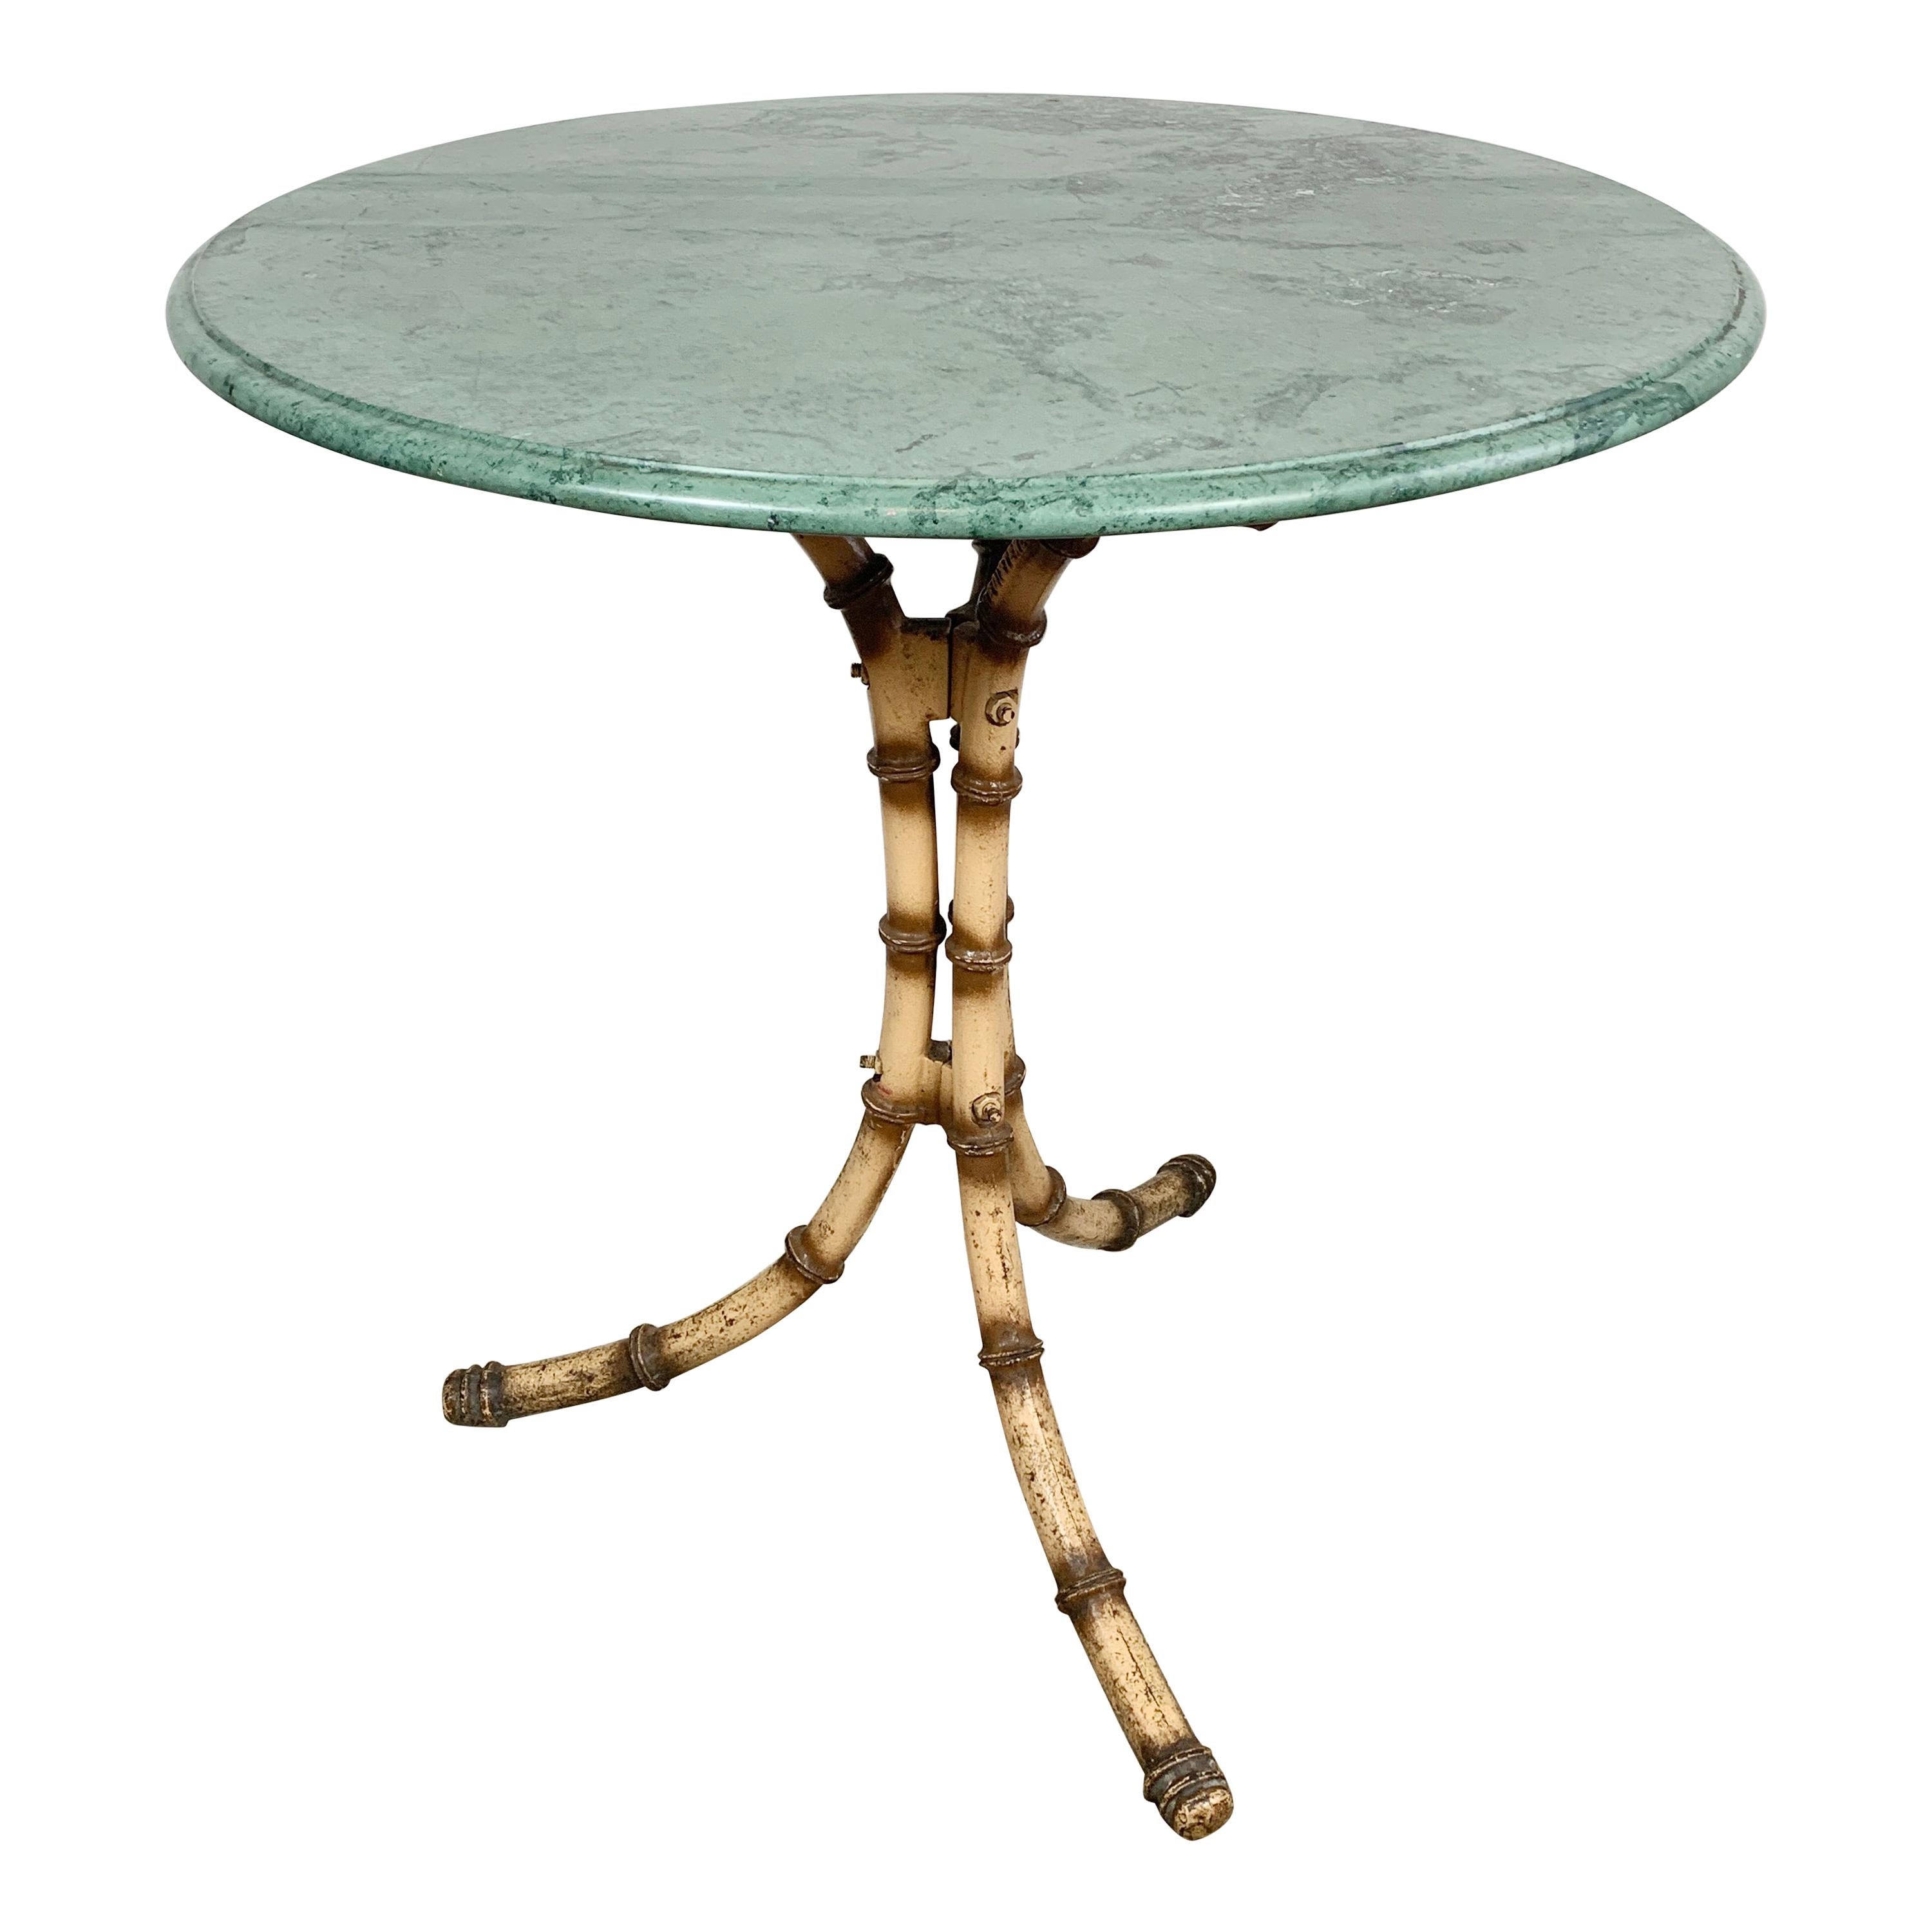 English Green Marble Faux Bamboo Café Table, Early 20th C